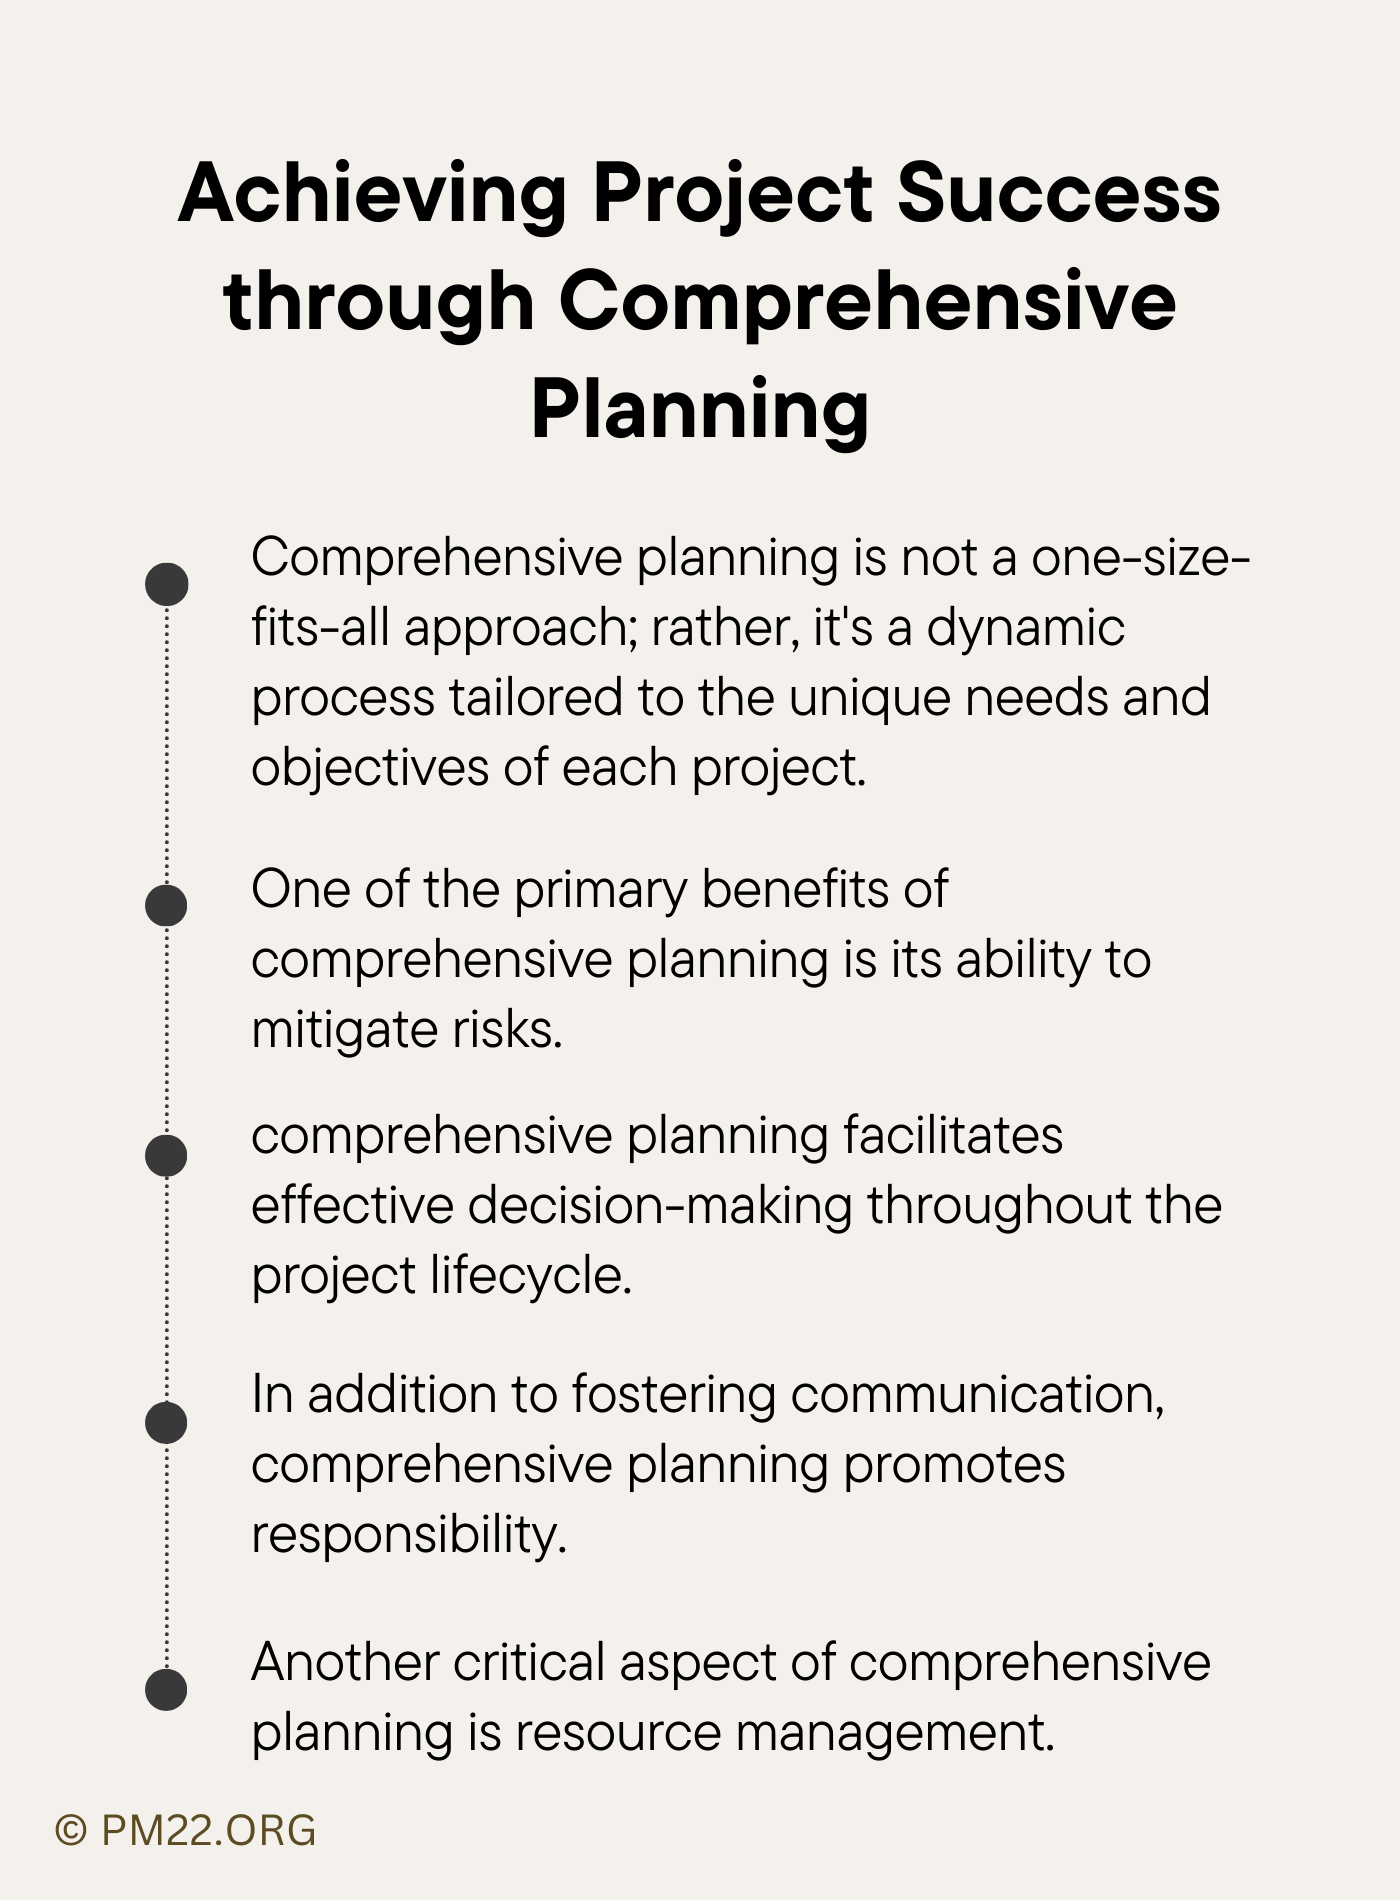 Achieving Project Success through Comprehensive Planning